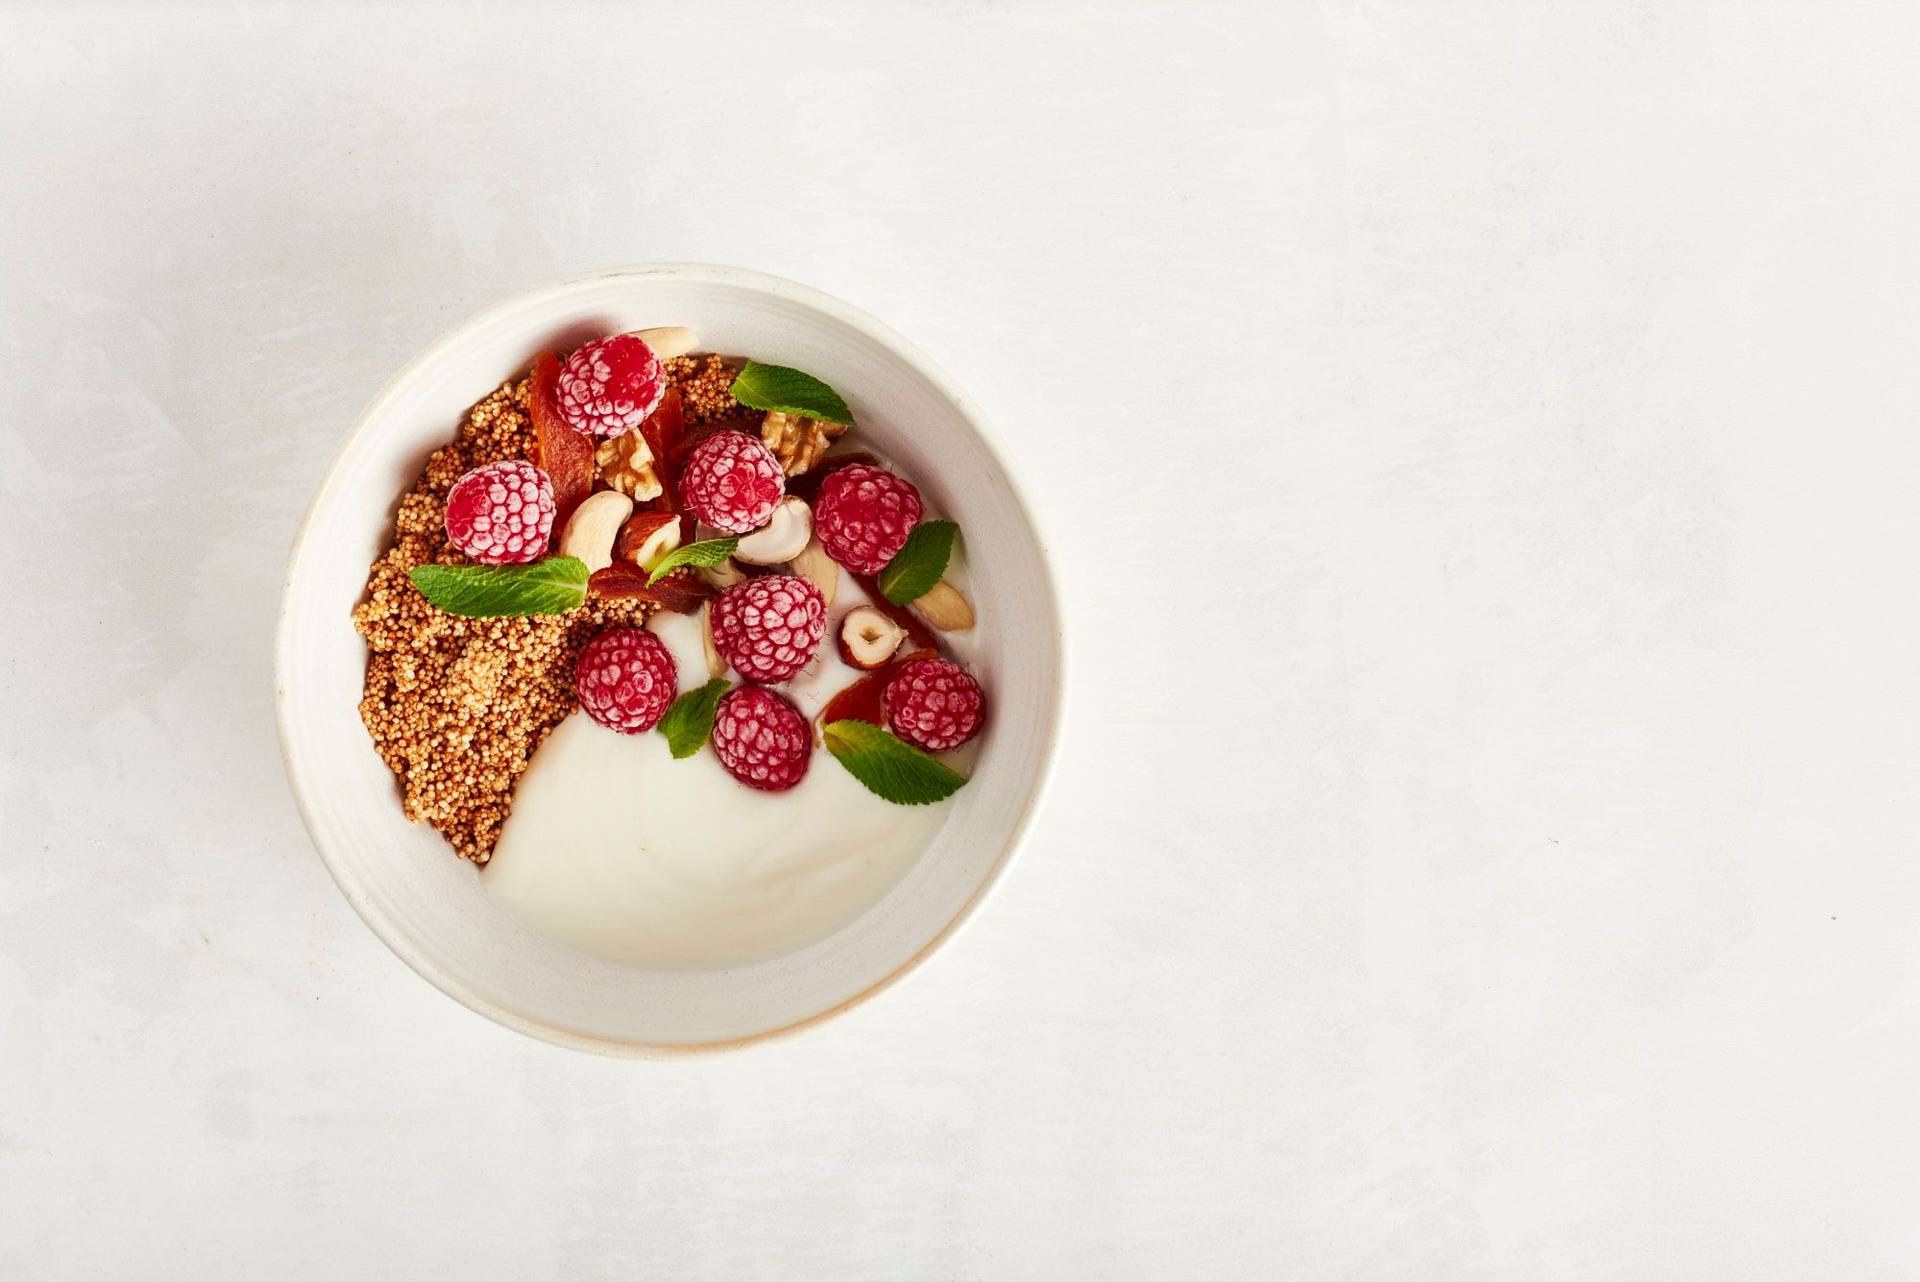 amaranth breakfast bowl with berries on white background